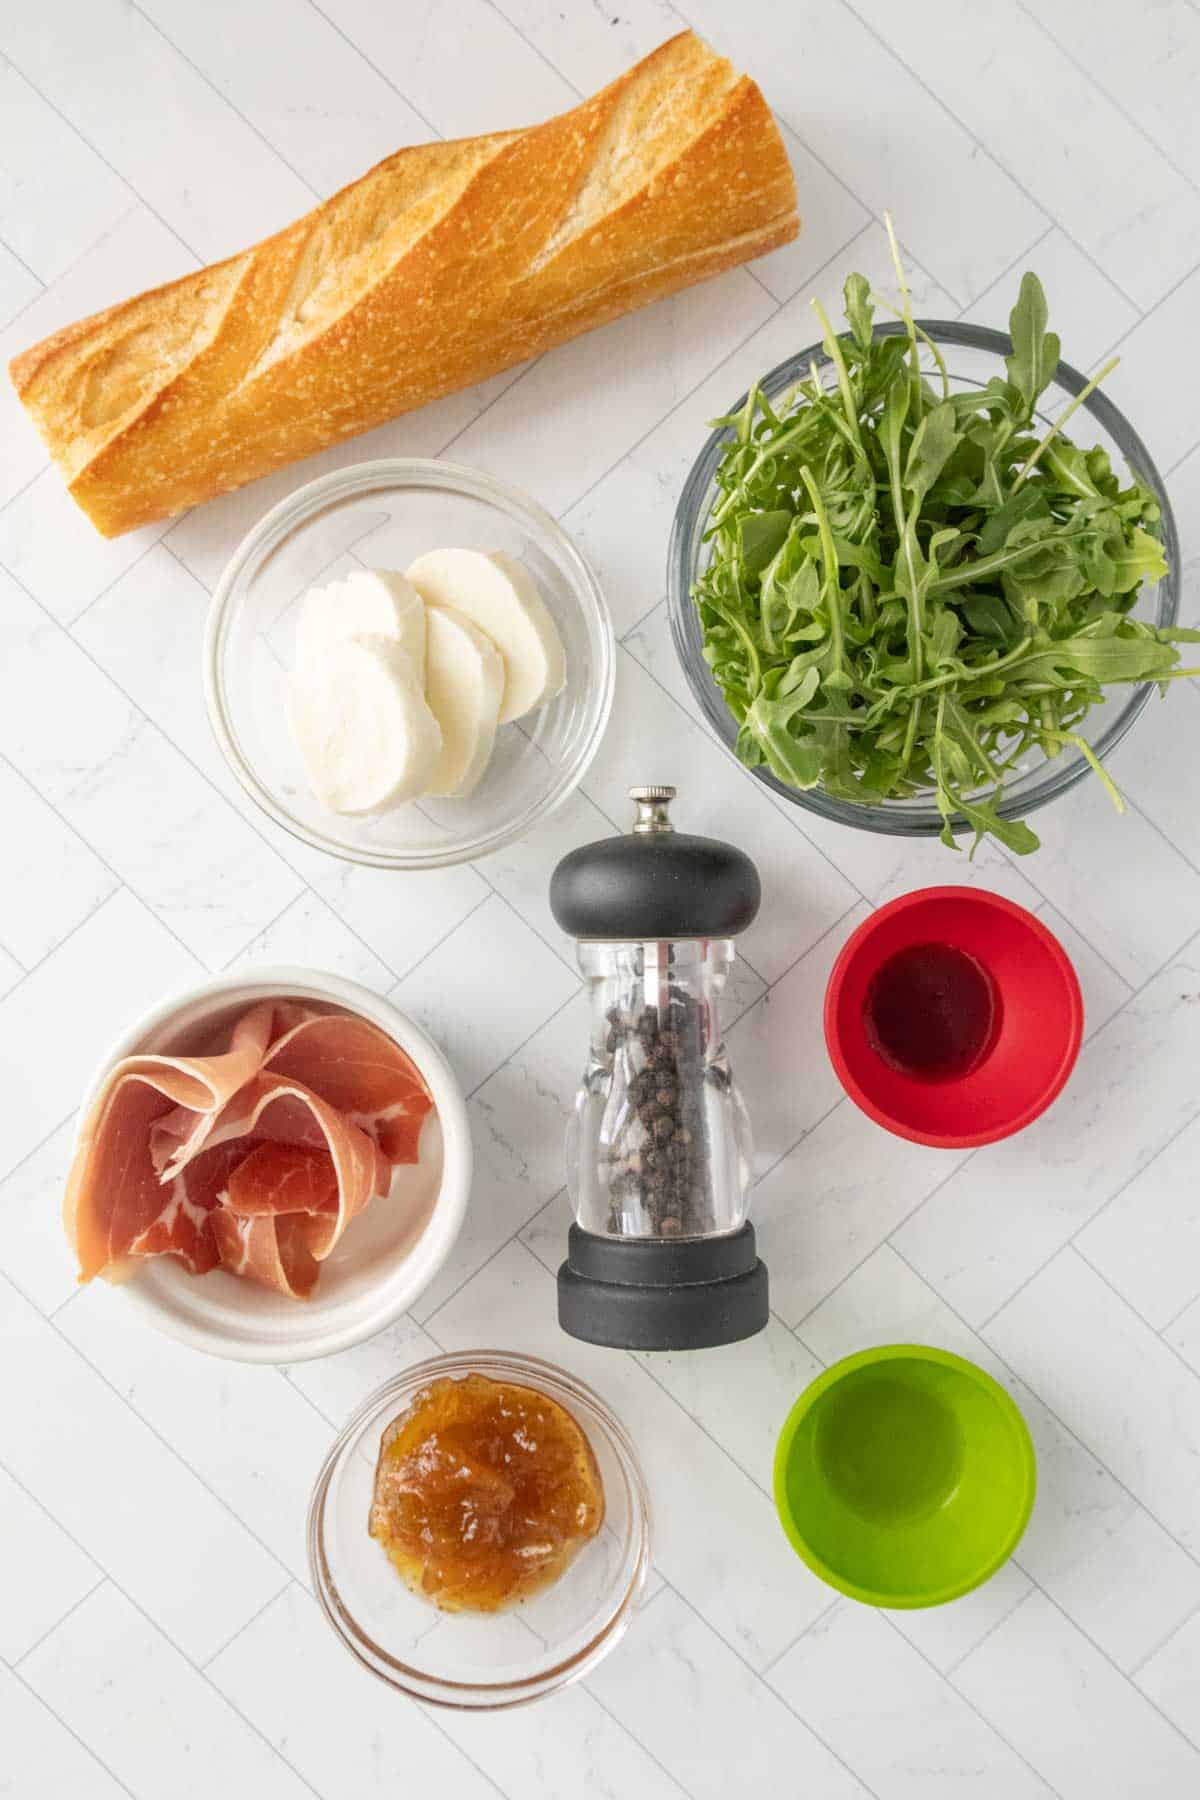 The ingredients for a sandwich are laid out on a white countertop.